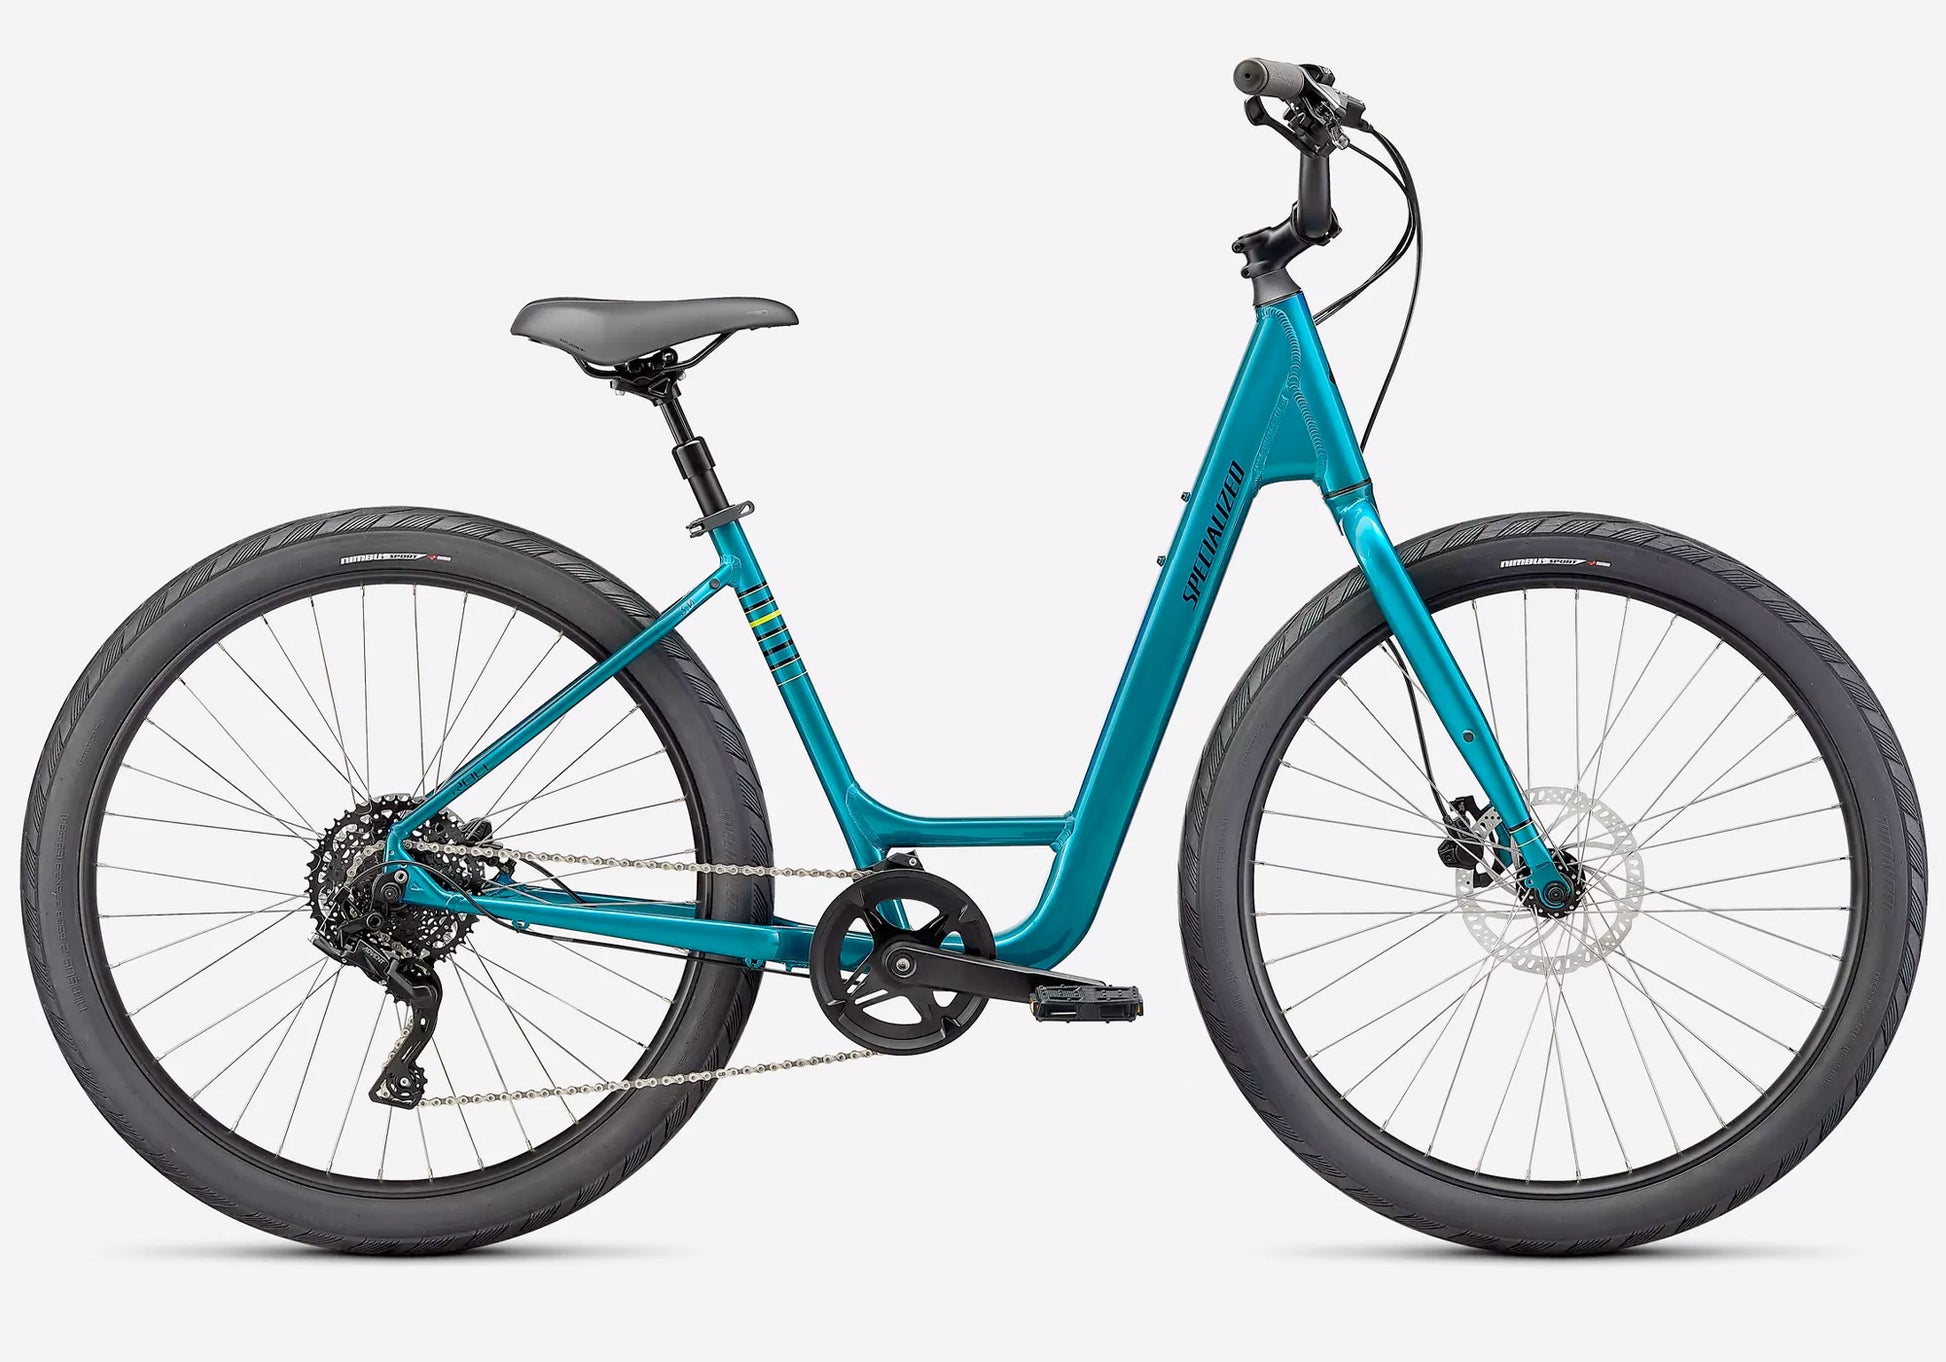 2022 Specialized Roll 3.0 Low Step Unisex Fitness/Urban Bike - Gloss Teal Tint, Woolys Wheels Sydney